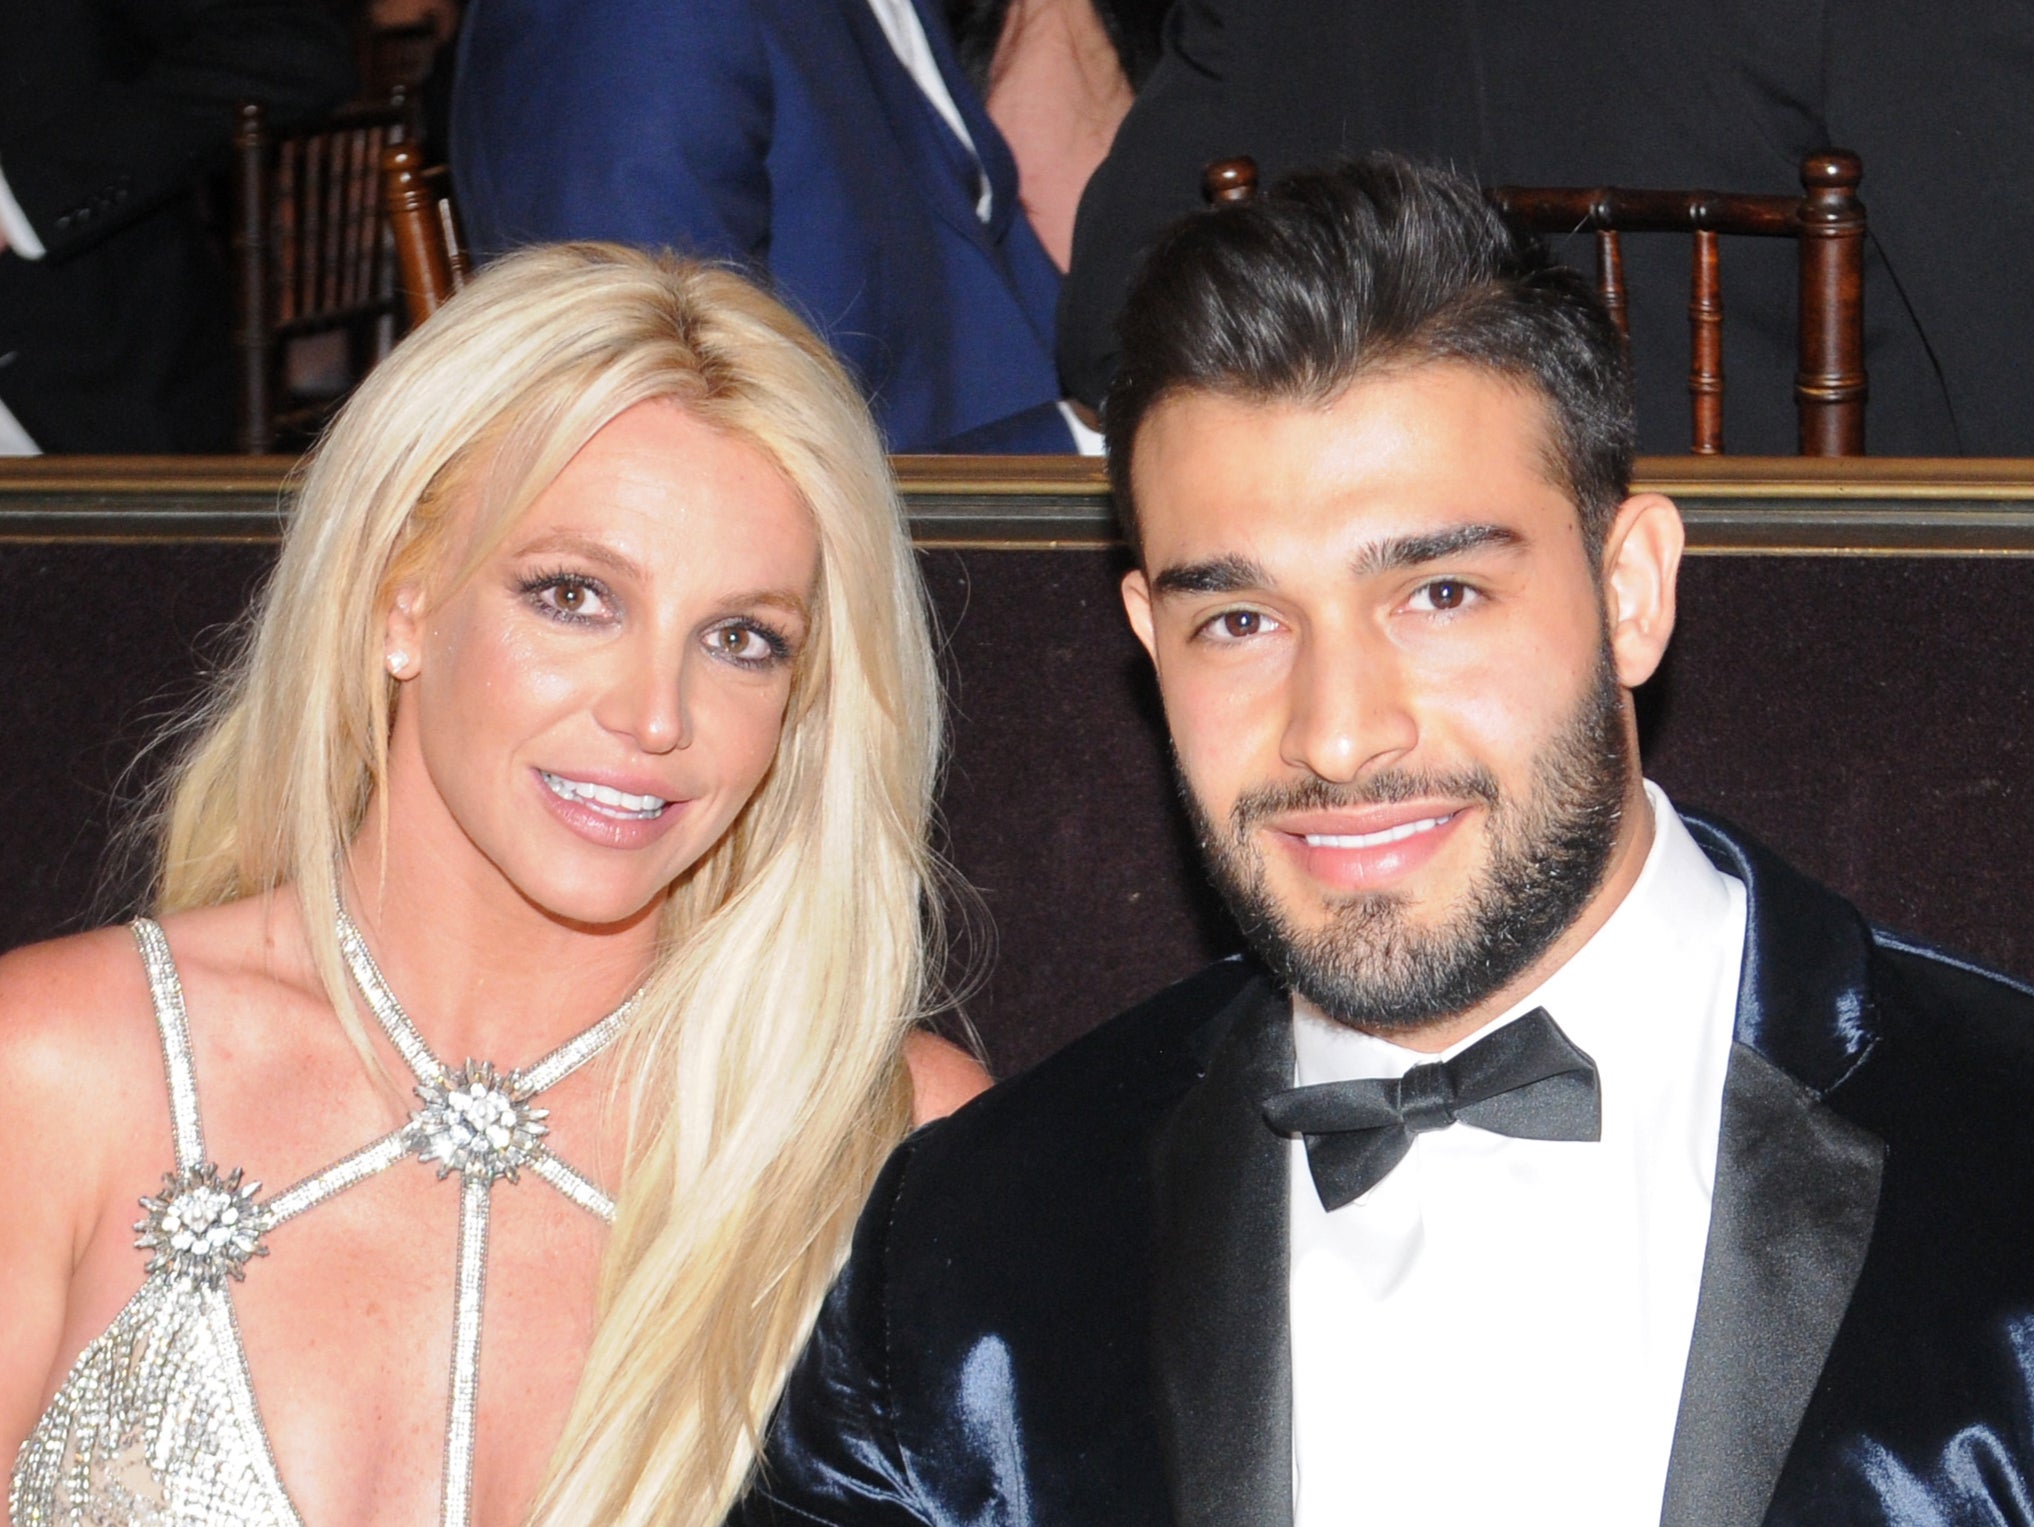 Britney Spears is expecting a baby with new husband Sam Asghari